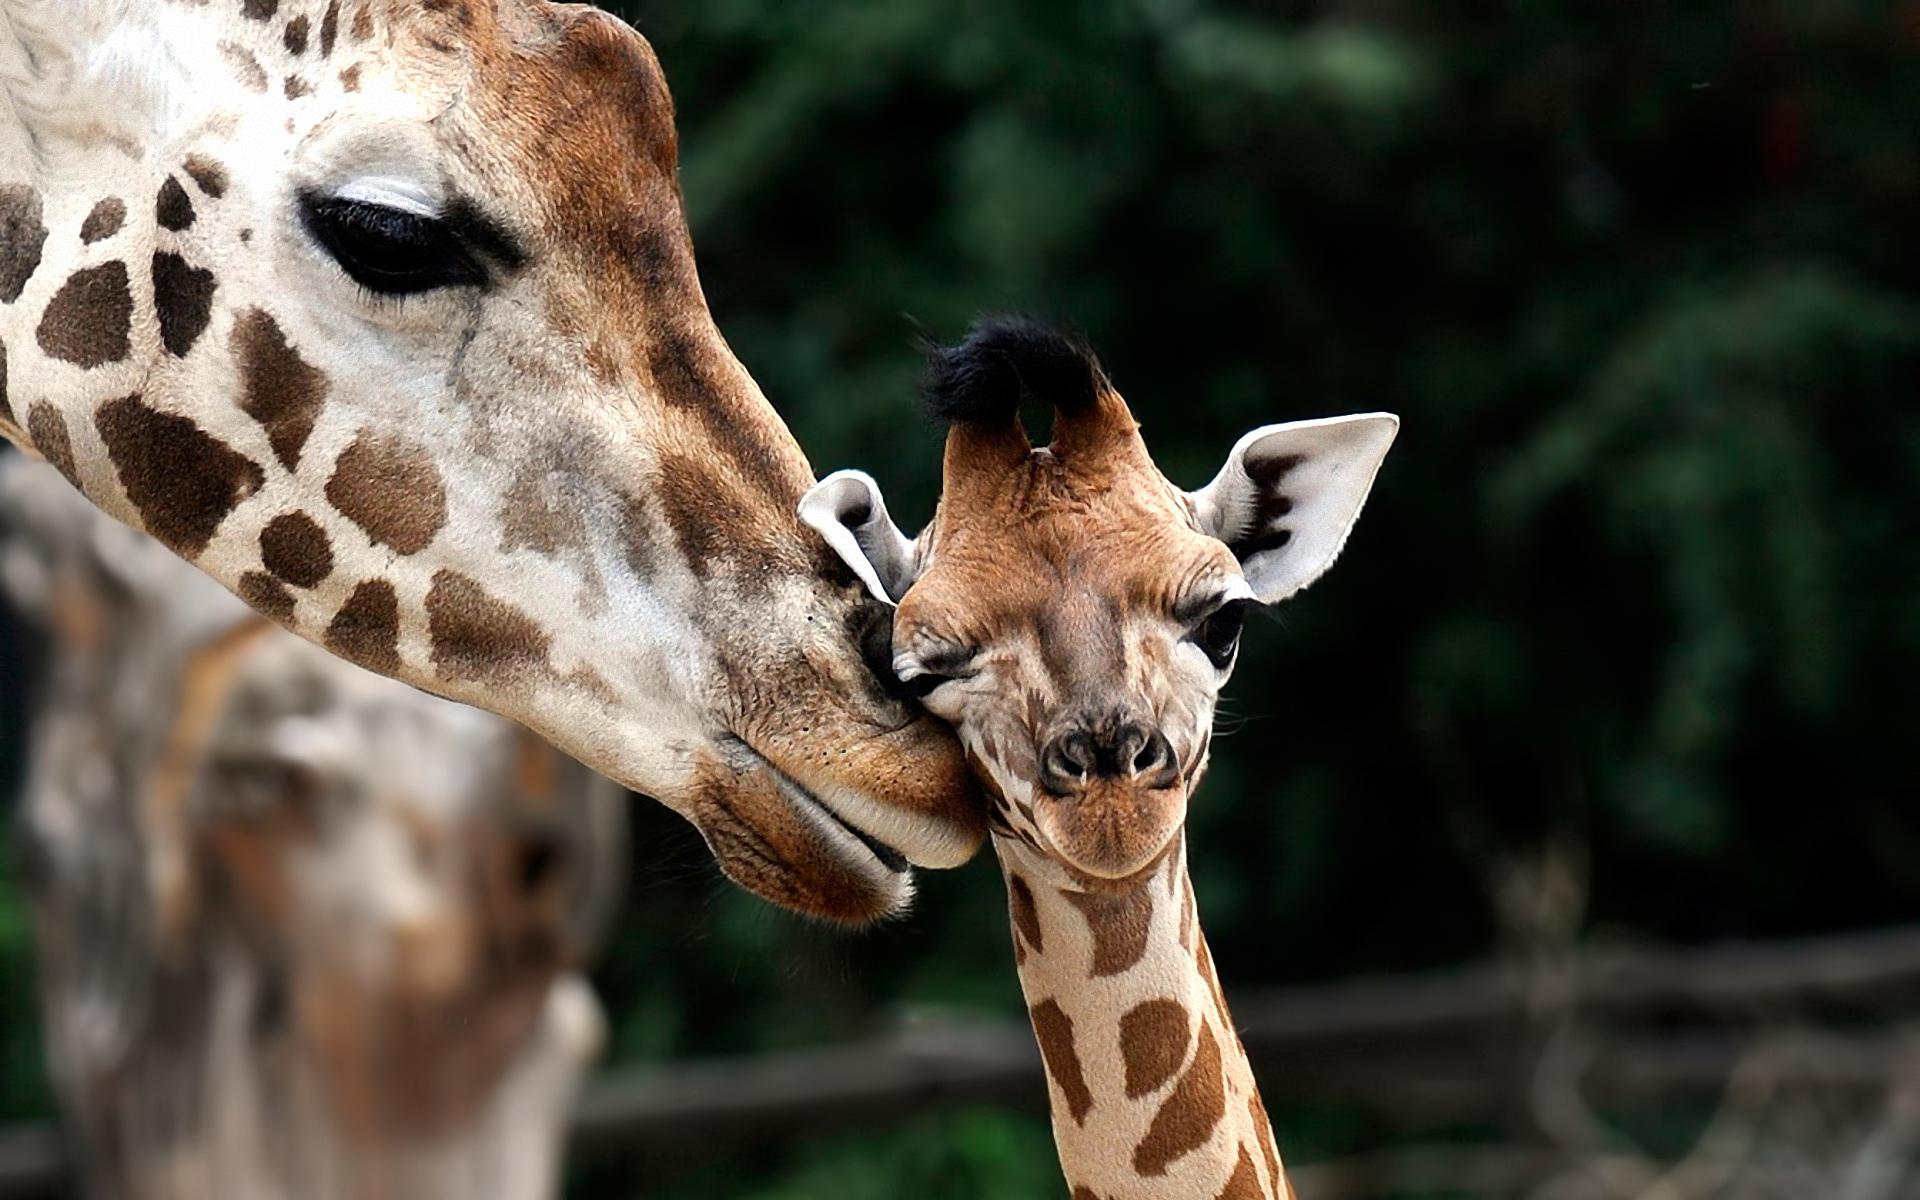 16. When a mother giraffe wants to give birth she often goes back where she was born